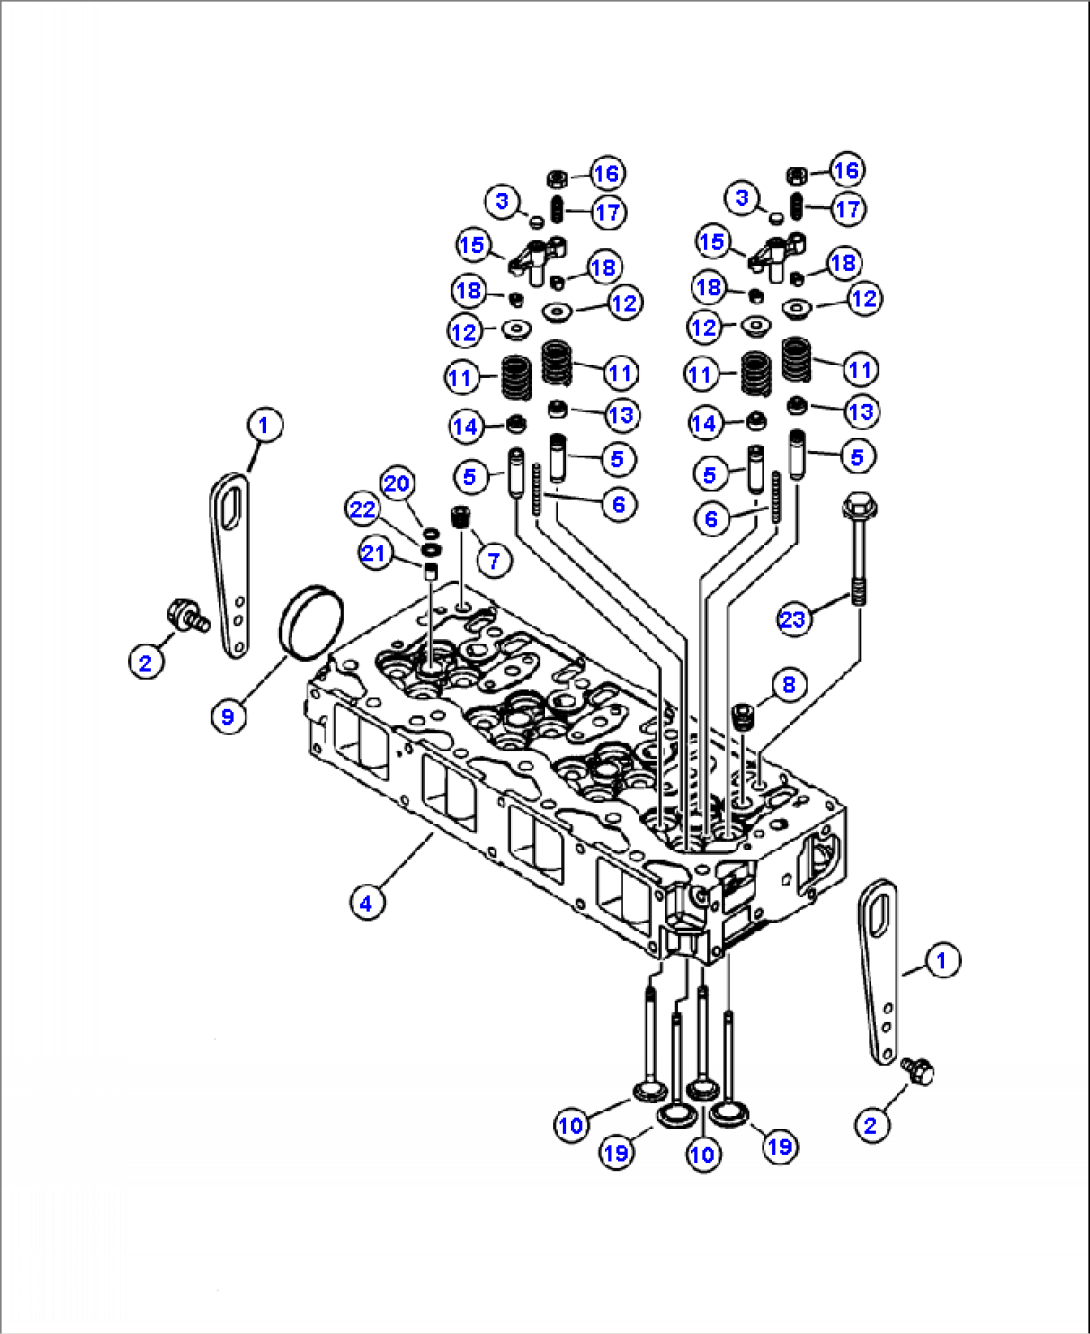 A0001-01A00 CYLINDER HEAD AND VALVES